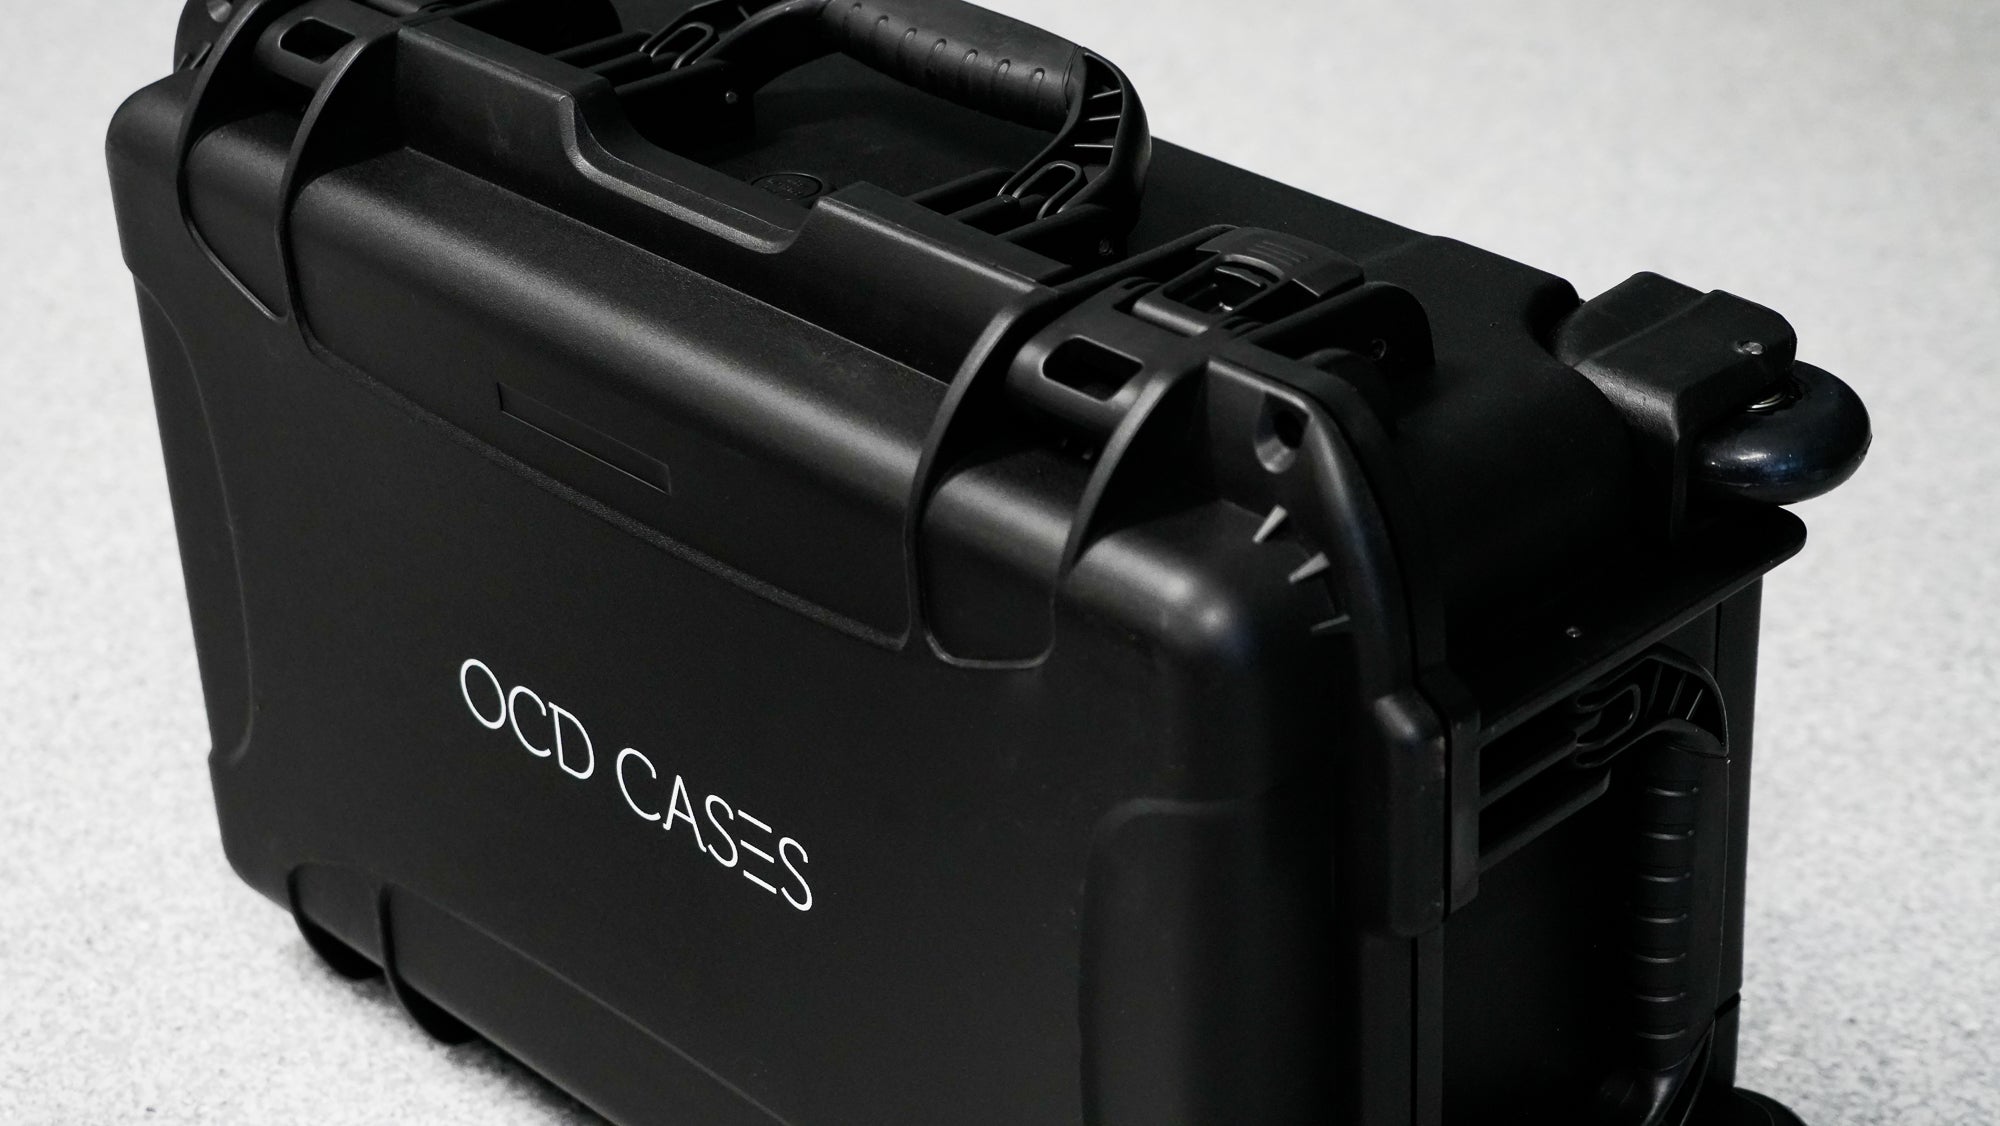 black protective hard case with "OCD CASES" logo on the front